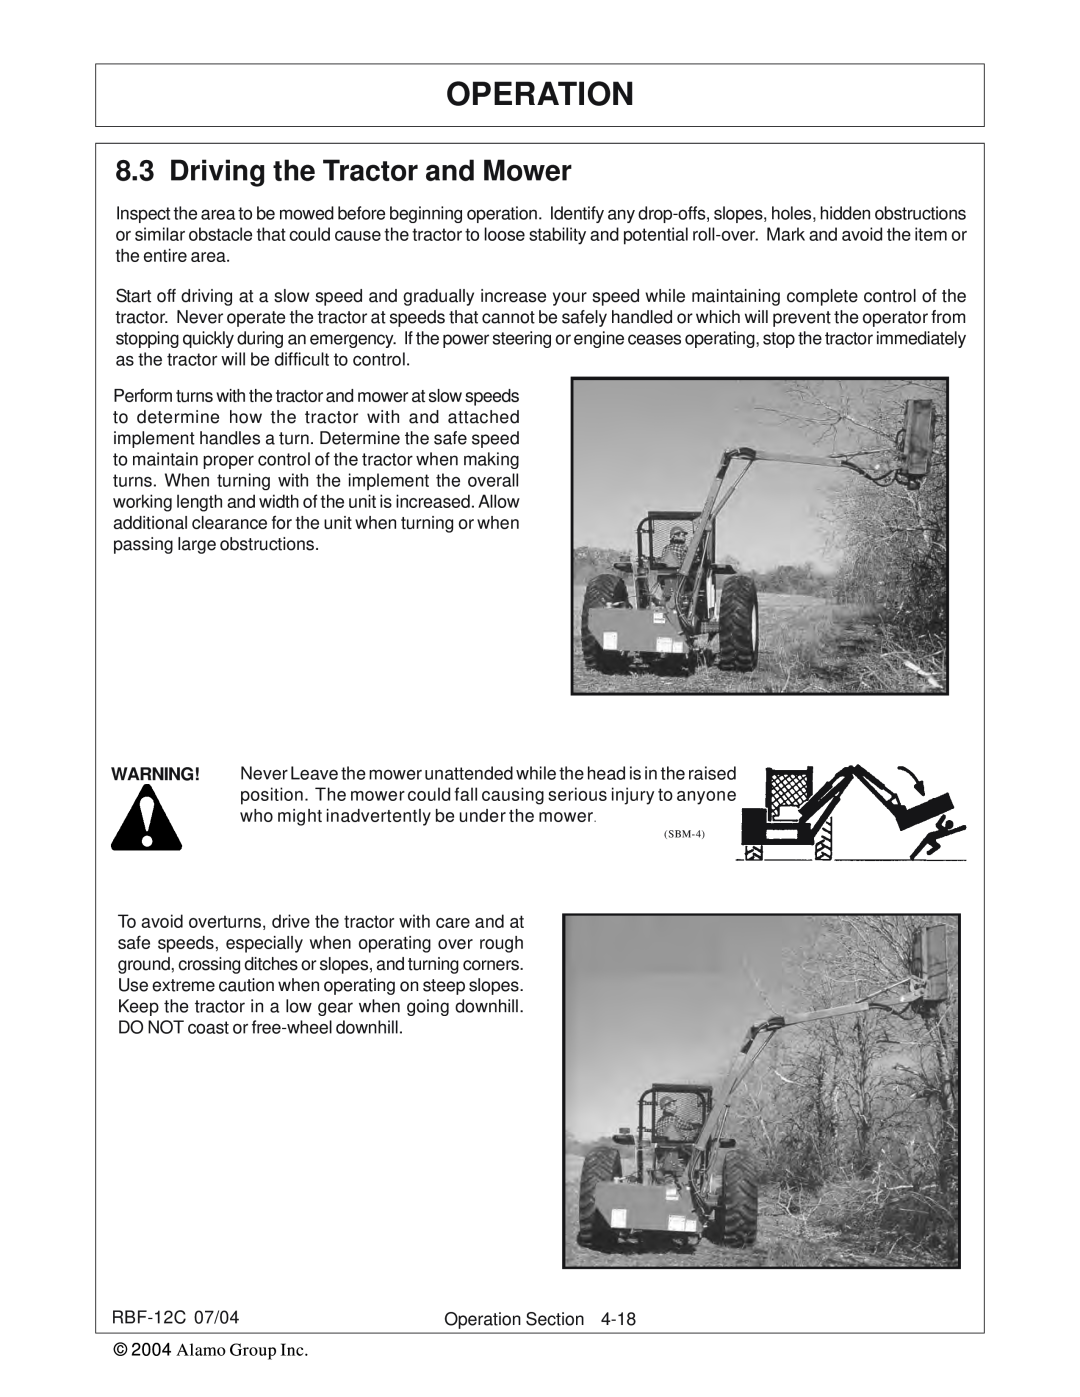 Tiger Products Co., Ltd RBF-12C manual Driving the Tractor and Mower, Operation 